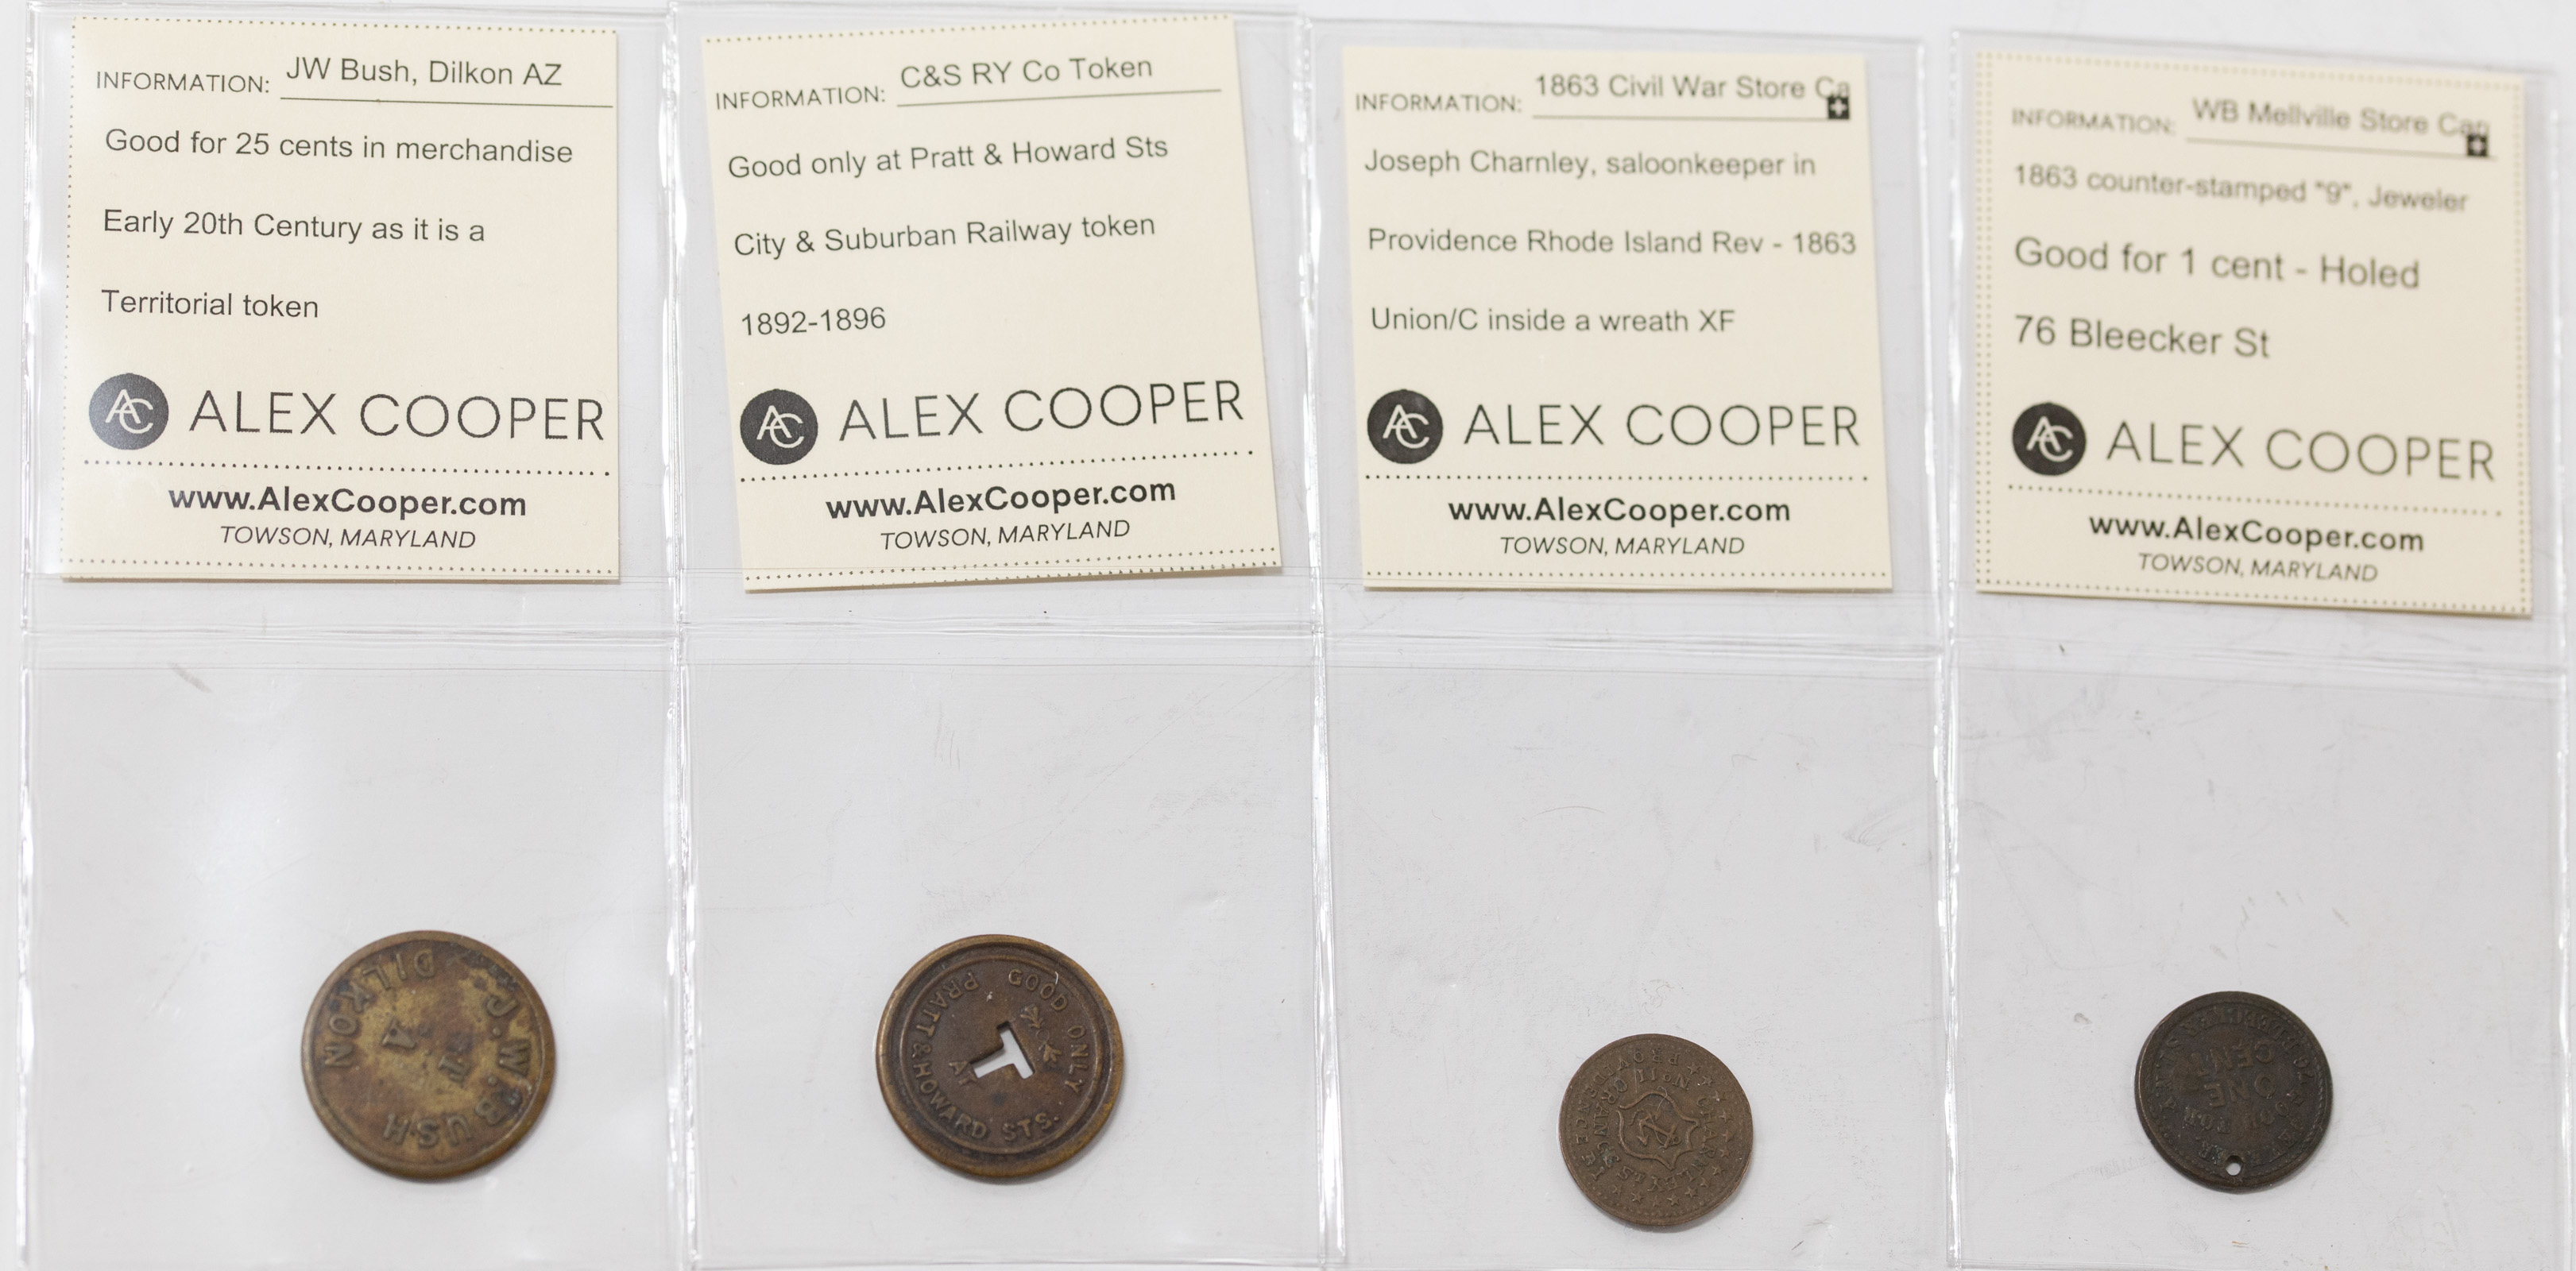 FOUR MERCHANT TOKENS, TWO ARE CIVIL